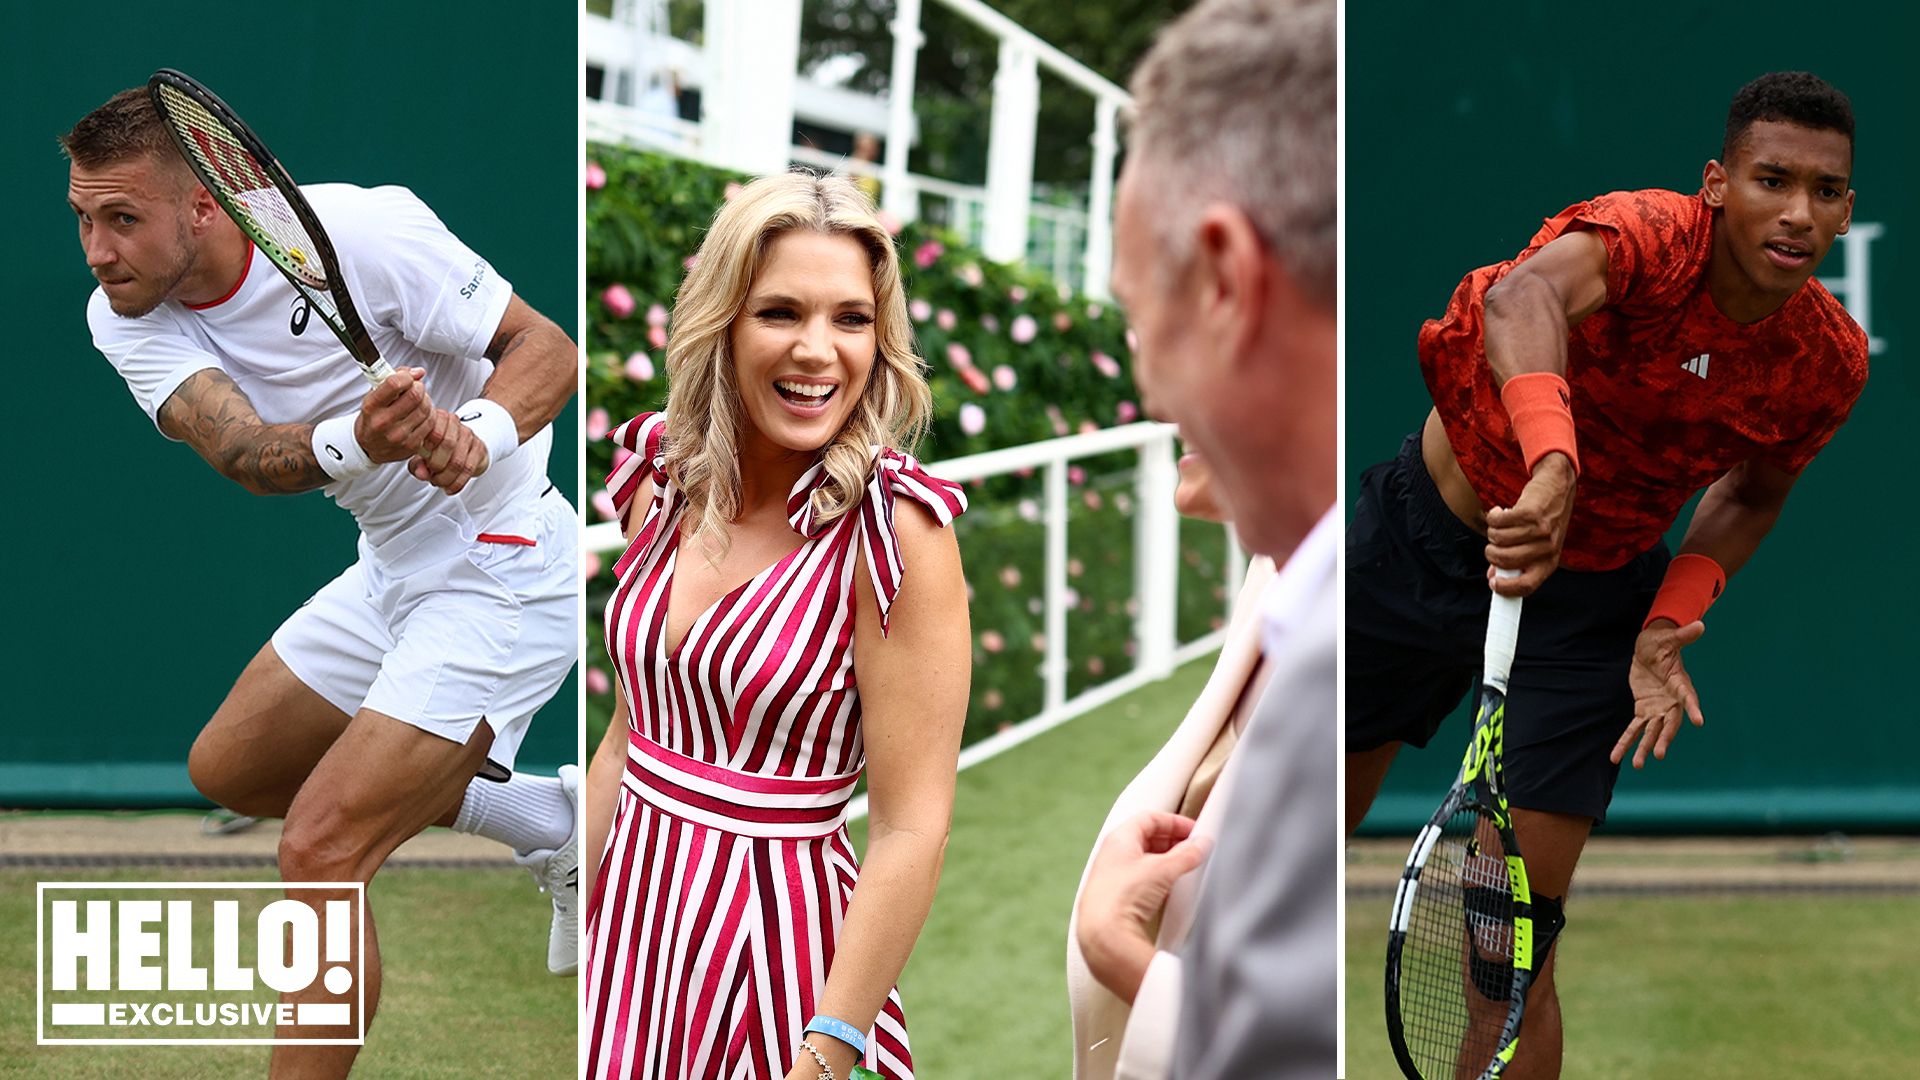 Boodles is back! The world's greatest tennis players descend on Stoke Park in front of a glittering crowd